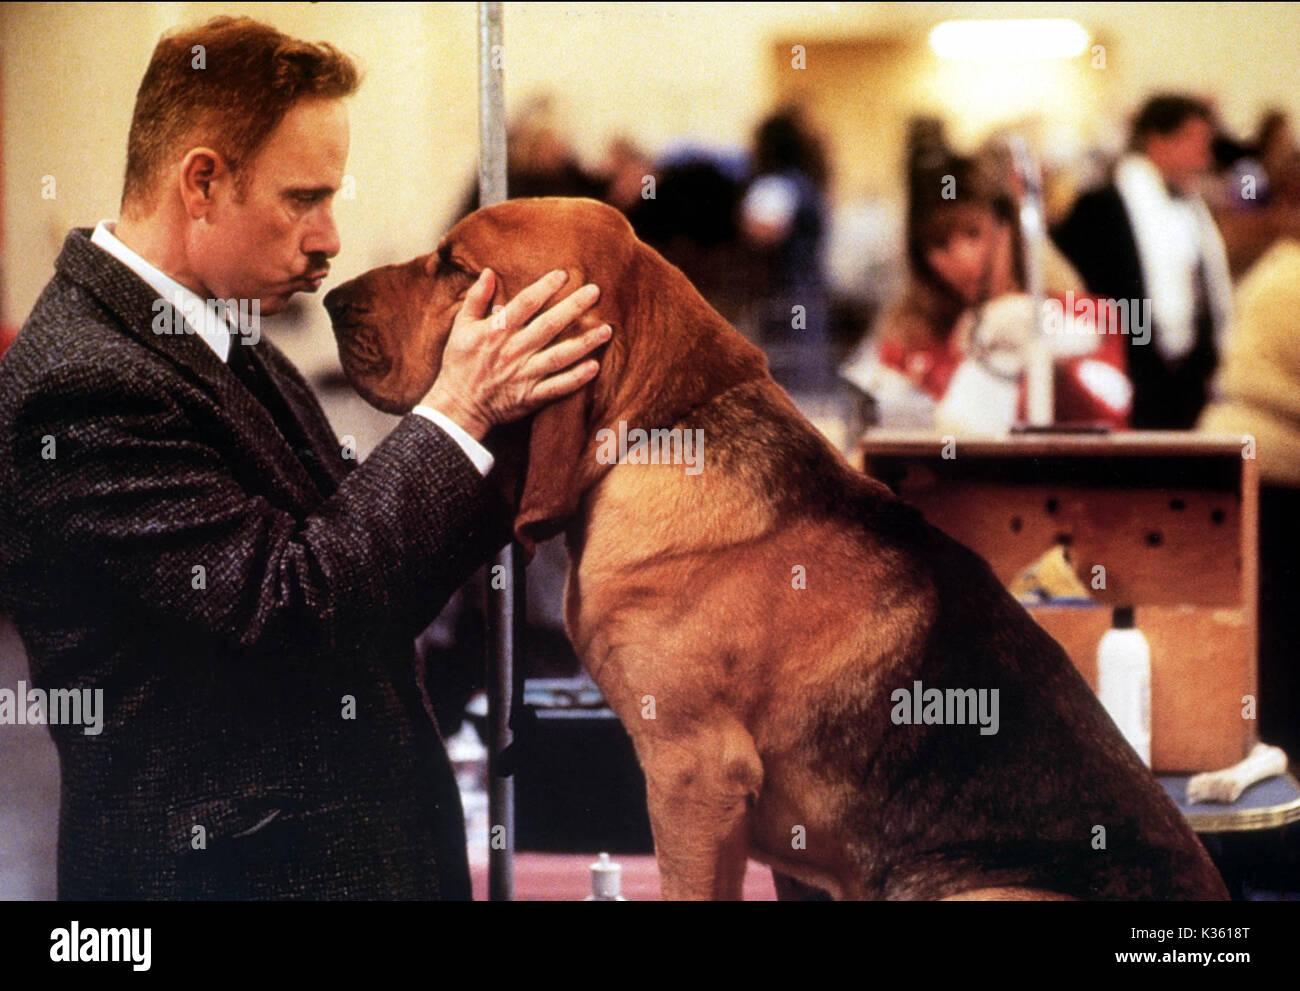 BEST IN SHOW CHRISTOPHER GUEST data: 2000 Foto Stock